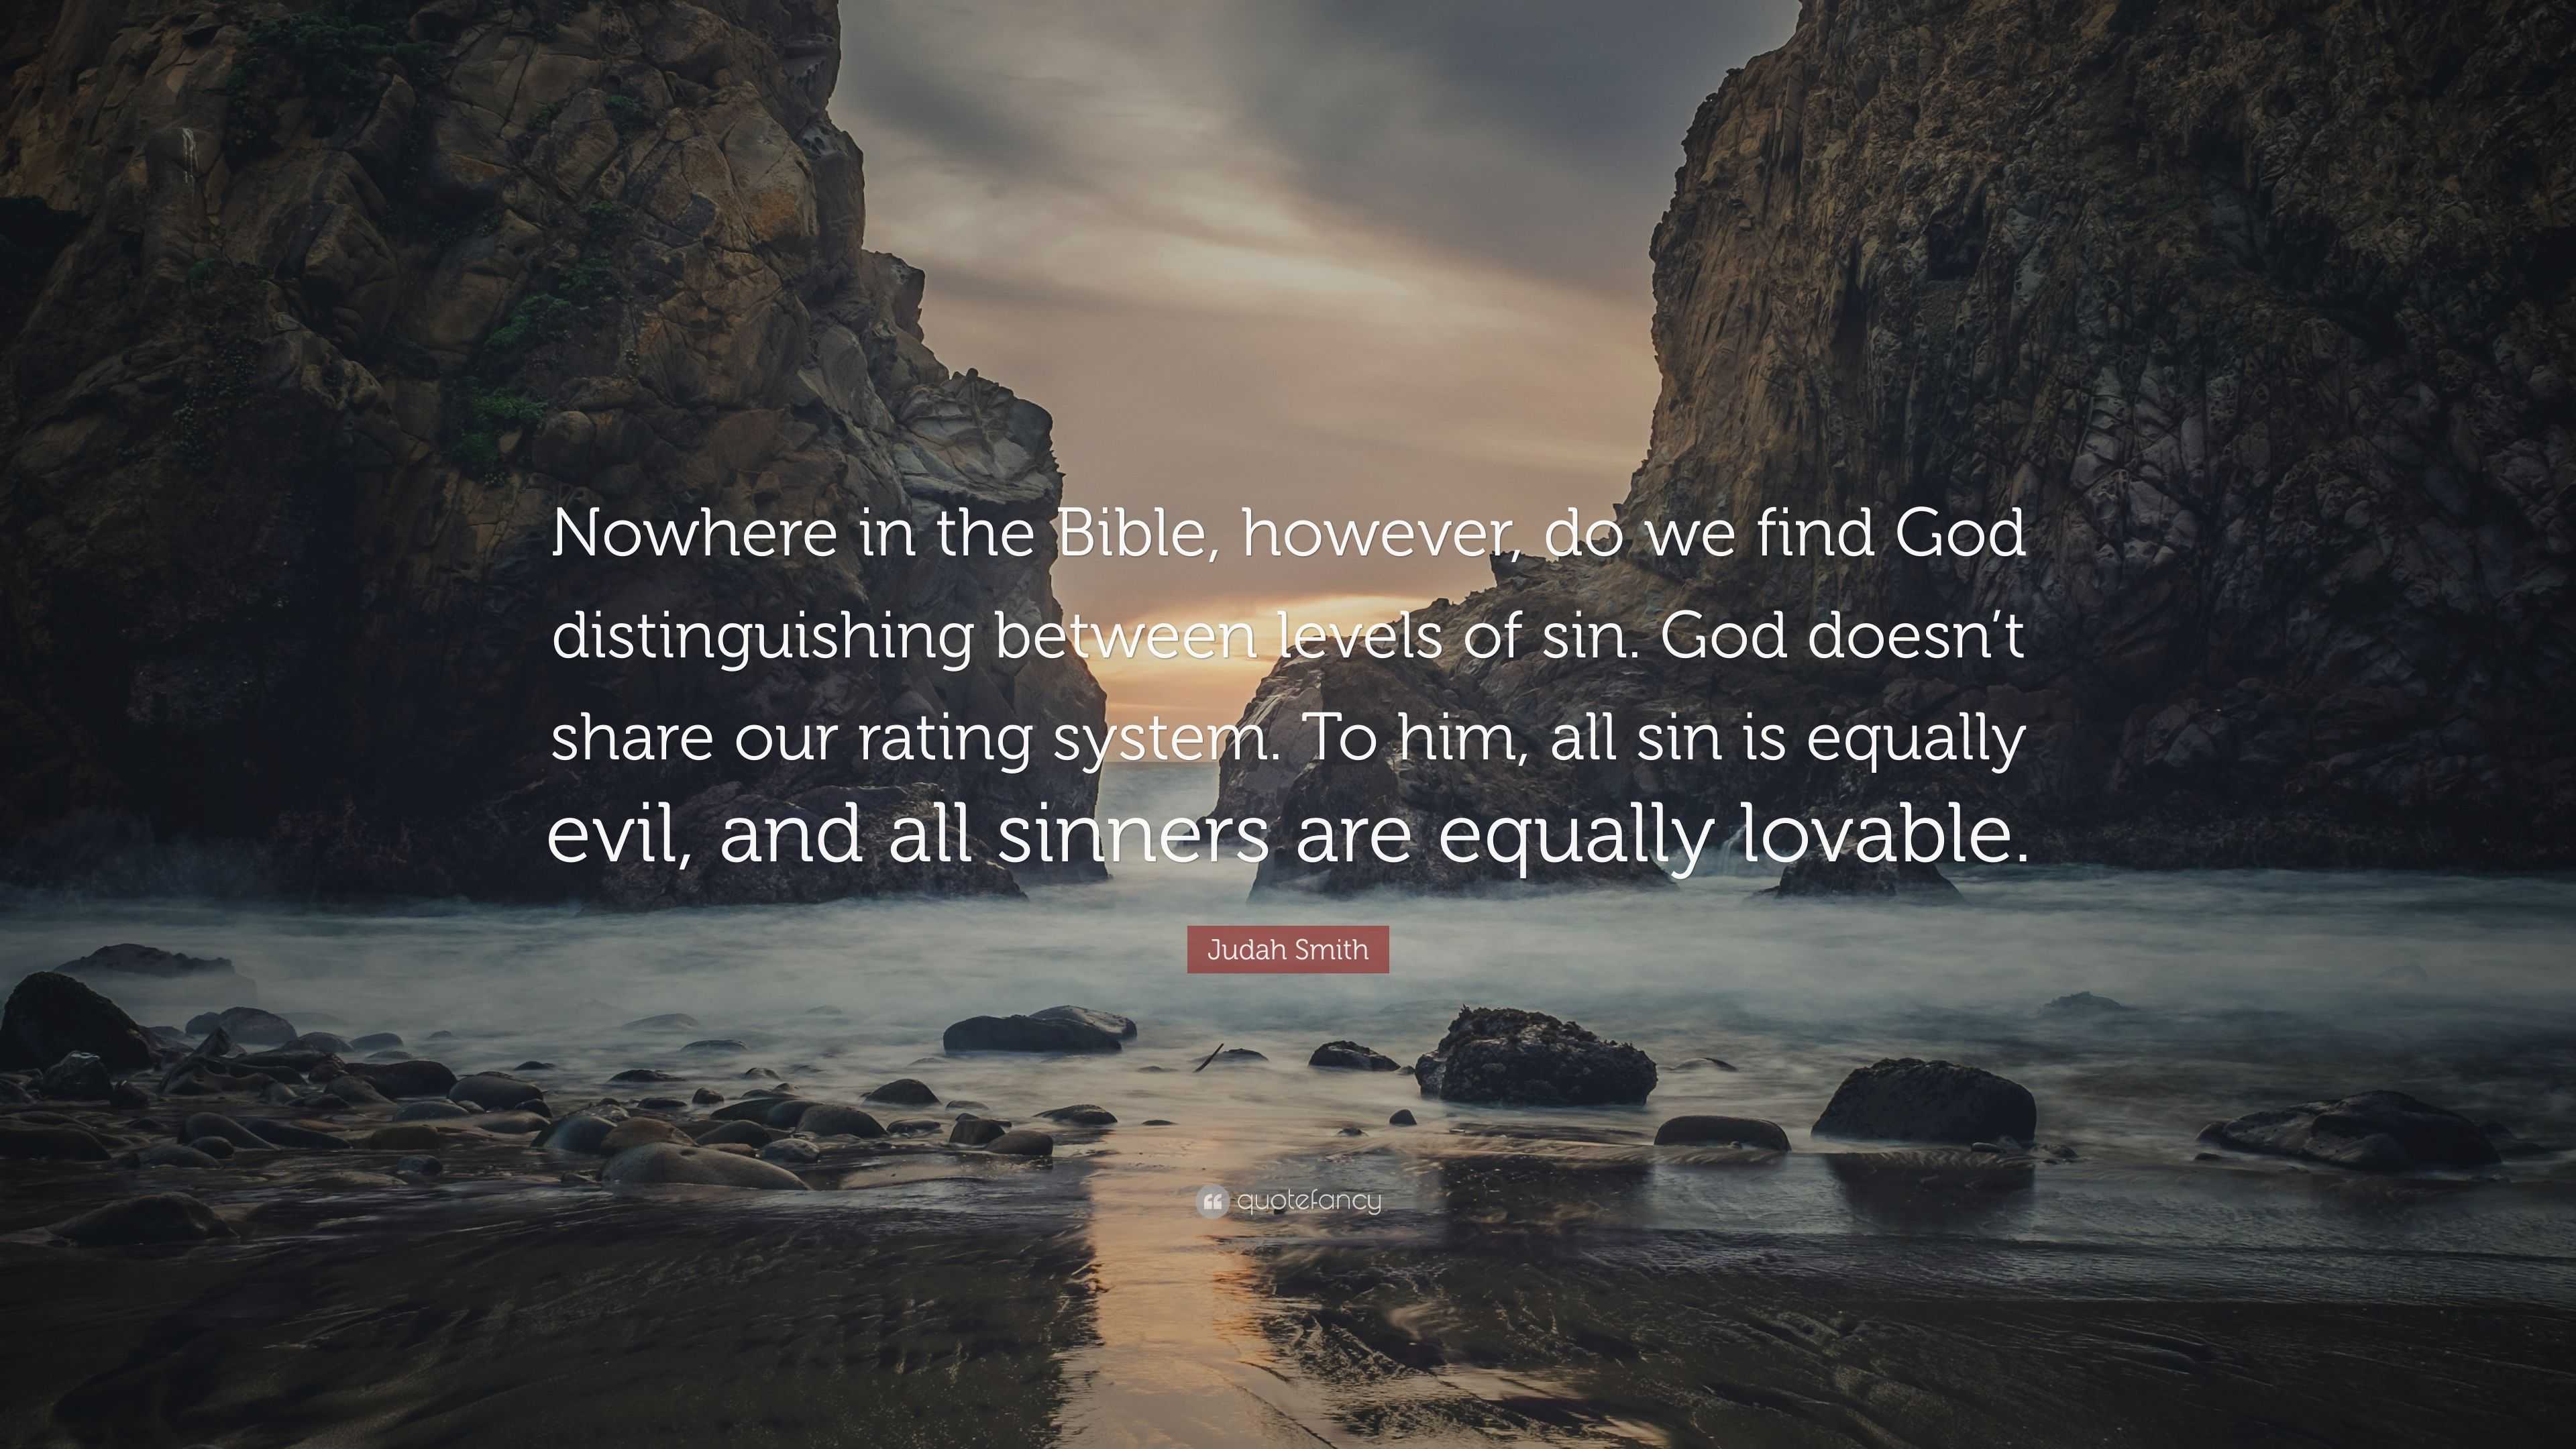 Judah Smith Quote: “Nowhere in the Bible, however, do we find God ...